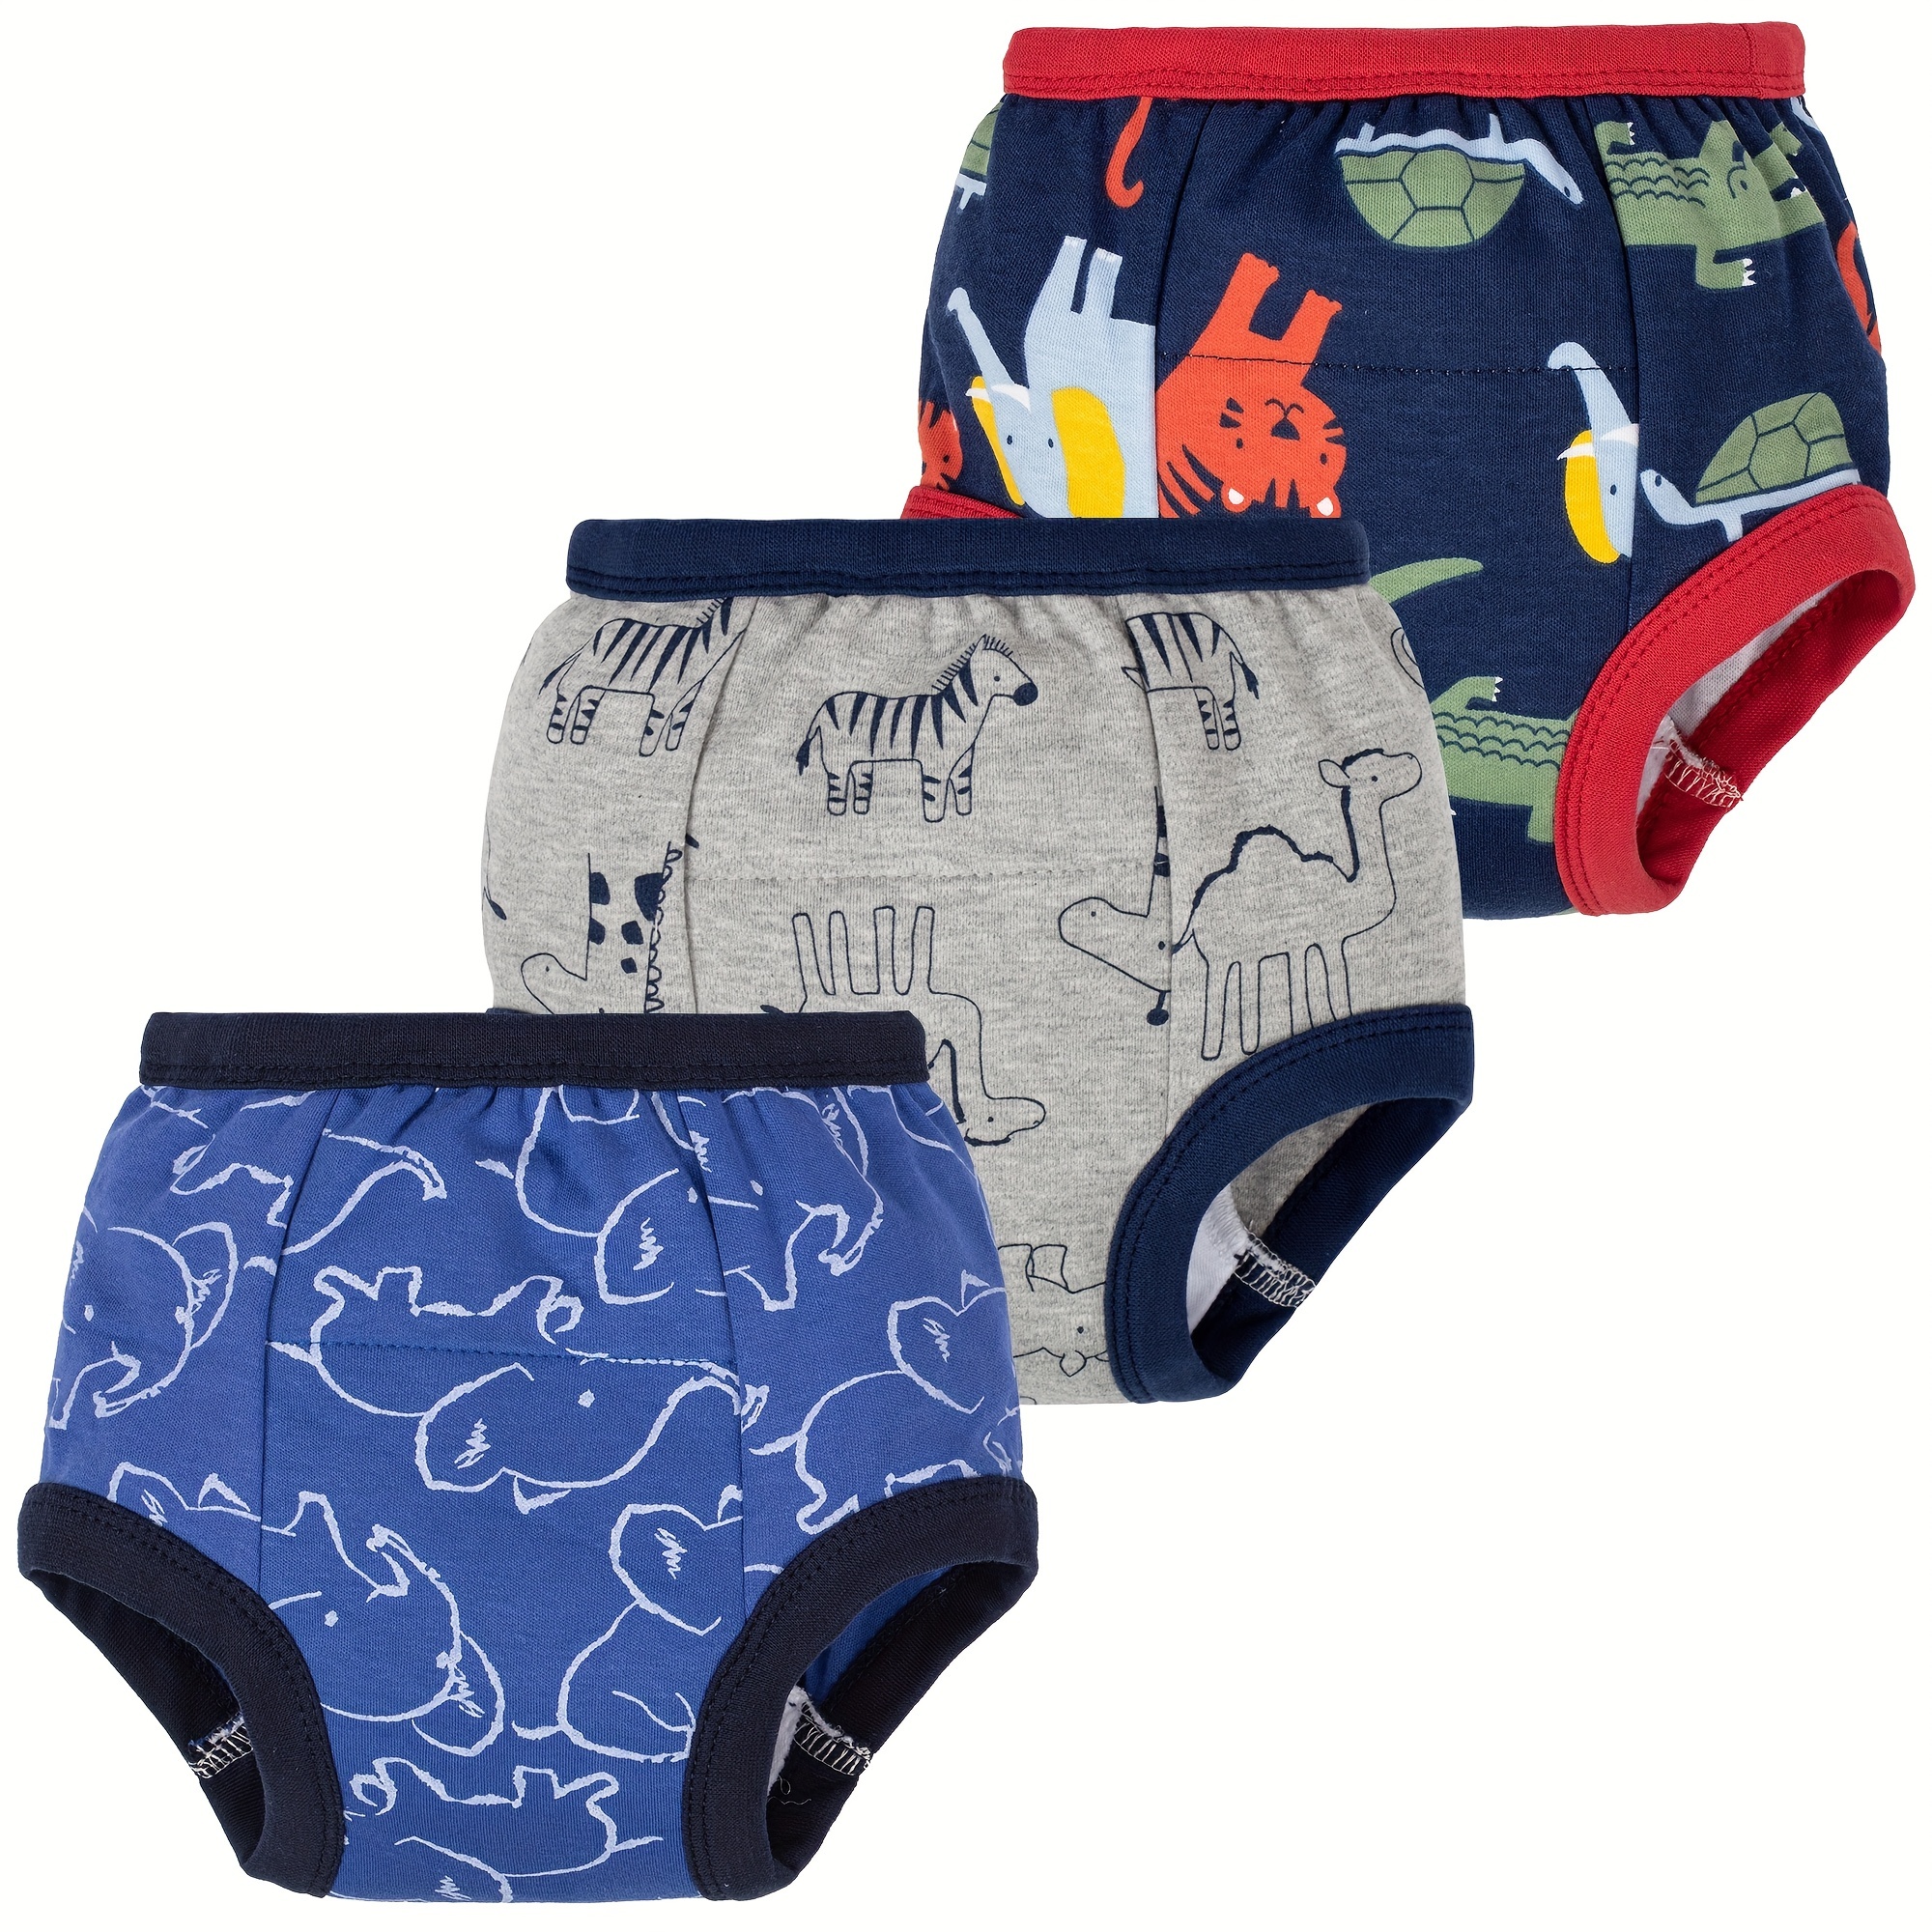 Baby Wing Training Pants For 7.5kg- - Newborn Baby Waterproof Diaper Pocket  Diapers Pure Cotton Gauze Diapers Reusable Toddler Potty Training Underwear  Boys And Girls Wing Training Pants Colorful Leaf Elephant 